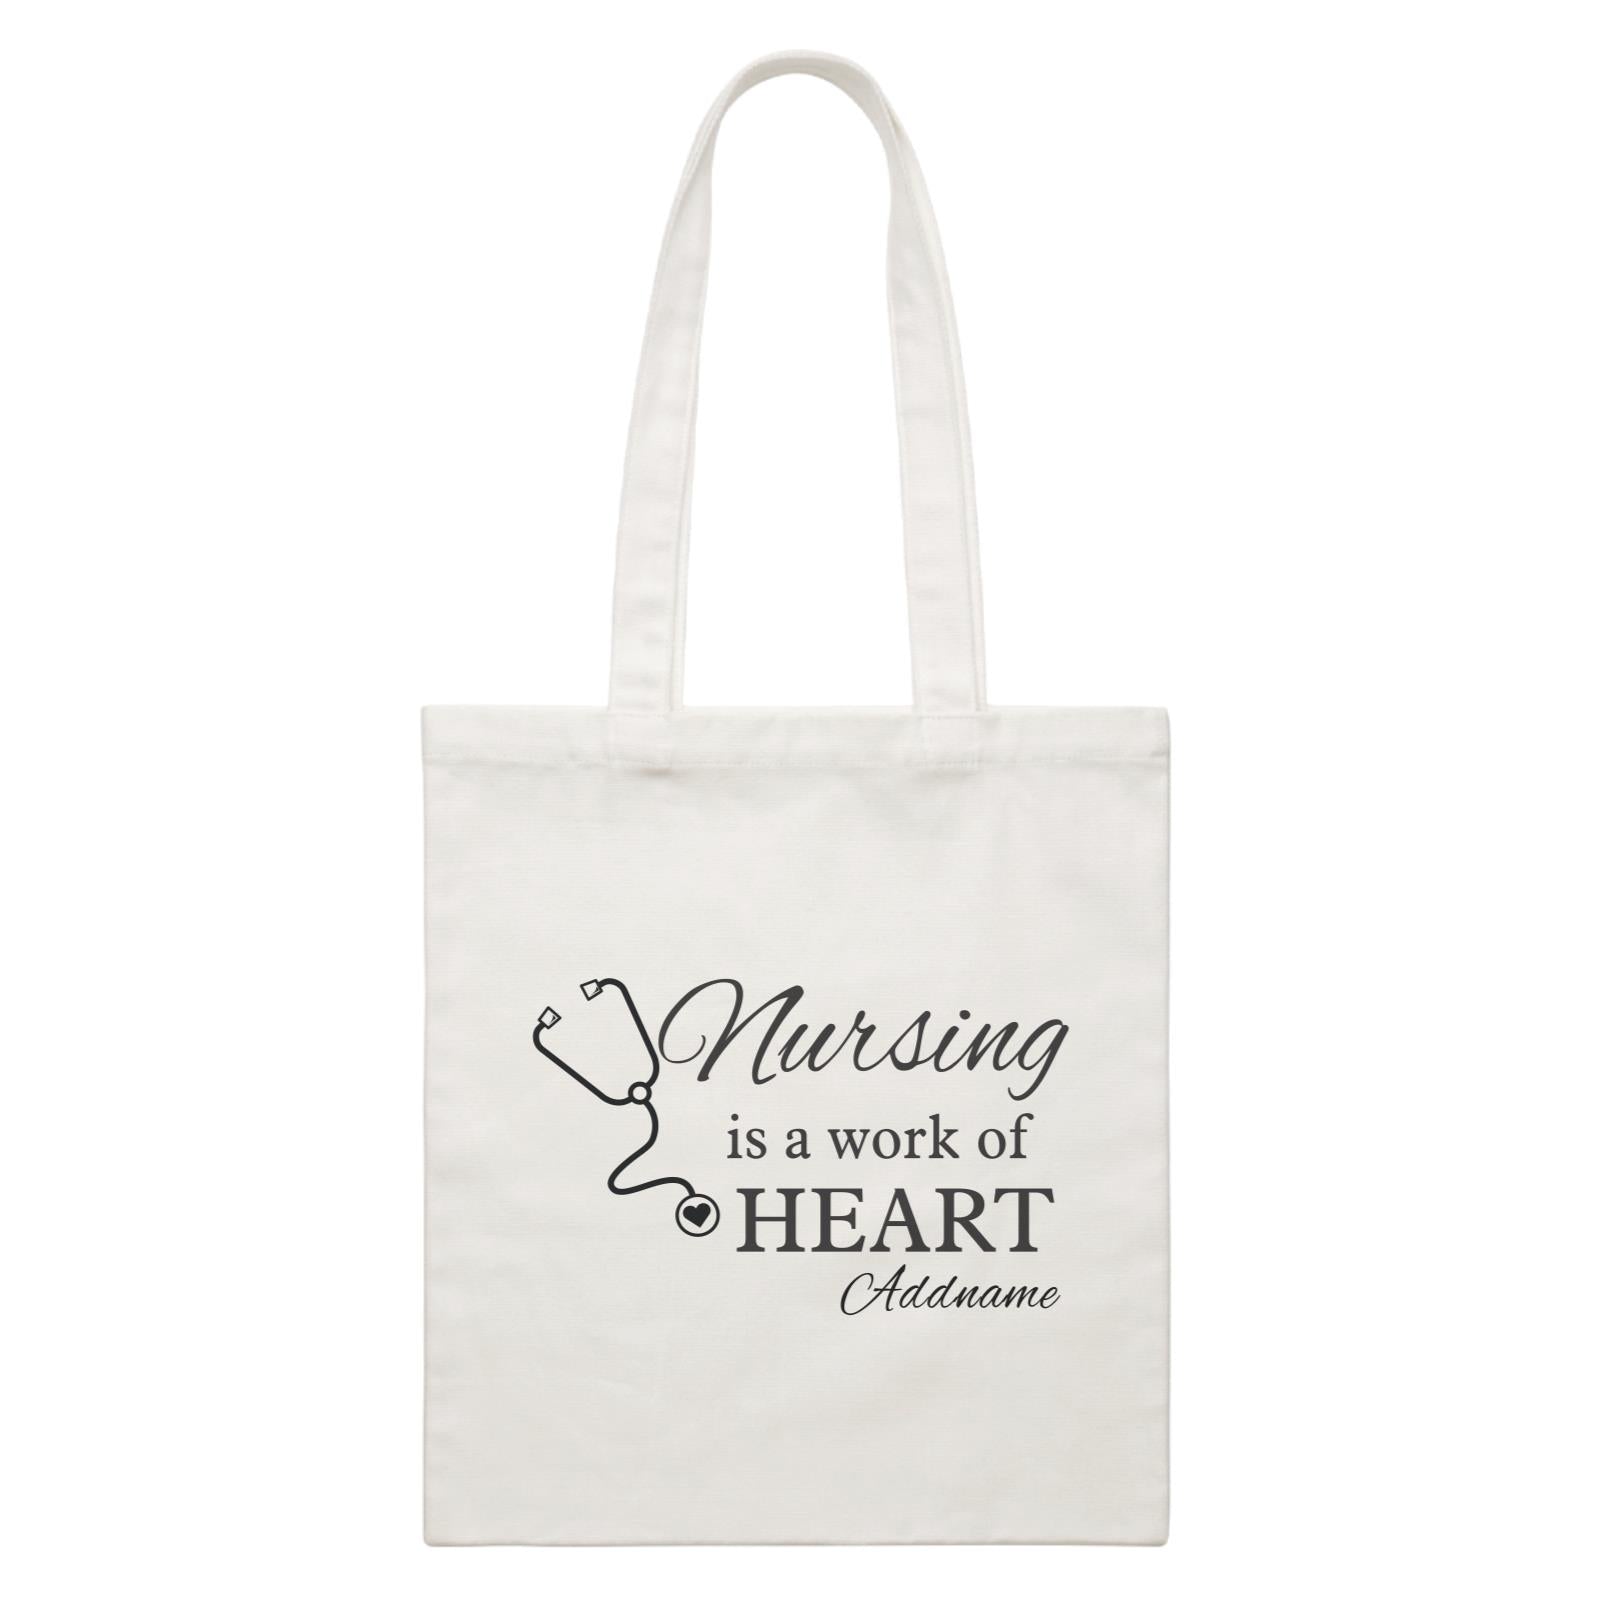 Nurse QuotesStethoscope Icon Is A Work Of Heart Addname White Canvas Bag